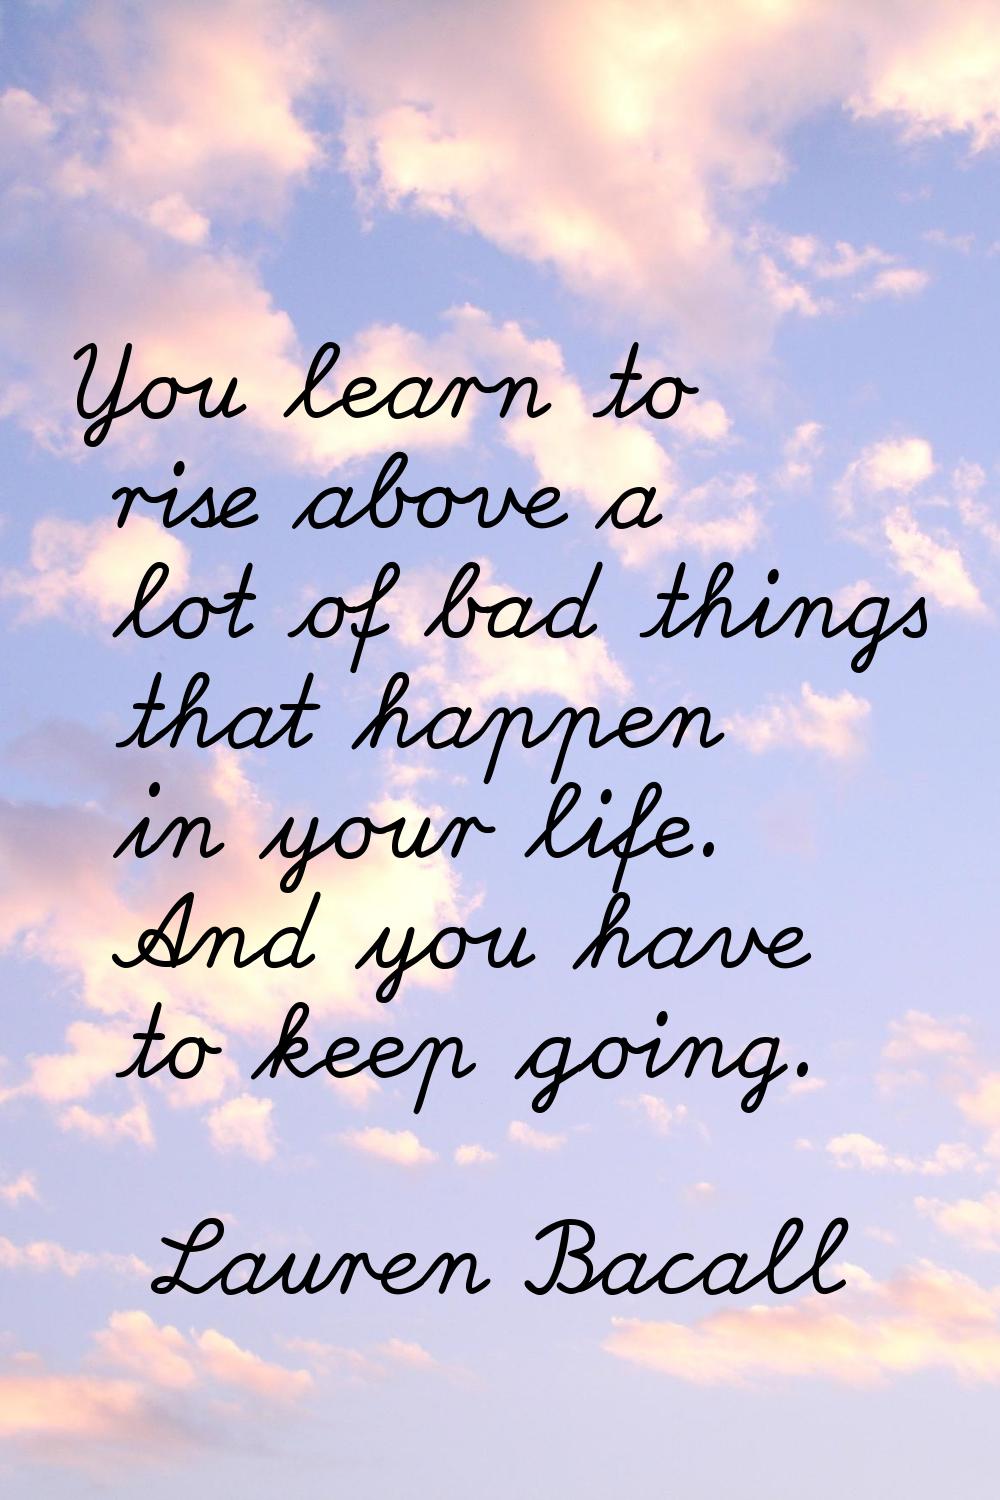 You learn to rise above a lot of bad things that happen in your life. And you have to keep going.